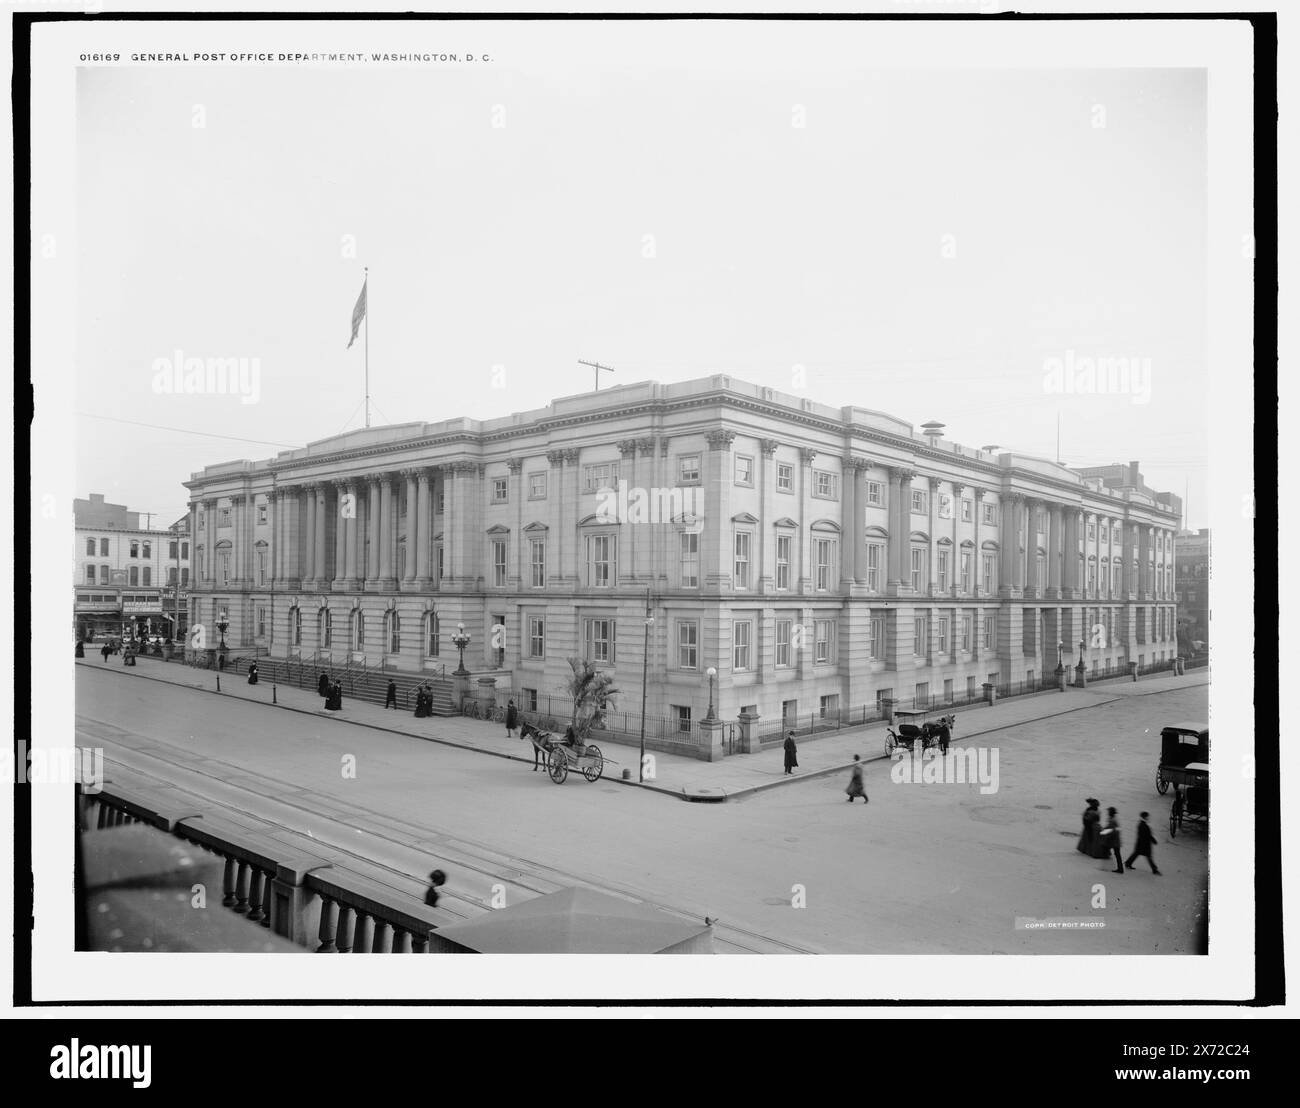 General Post Office department, Washington, D.C., Date based on Detroit, Catalogue J Supplement (1901-1906)., 'WHJ 1326' on negative., Detroit Publishing Co. no. 016169., Gift; State Historical Society of Colorado; 1949,  General Post Office Building (Washington, D.C.) , Post offices. , Government facilities. , United States, District of Columbia, Washington (D.C.) Stock Photo